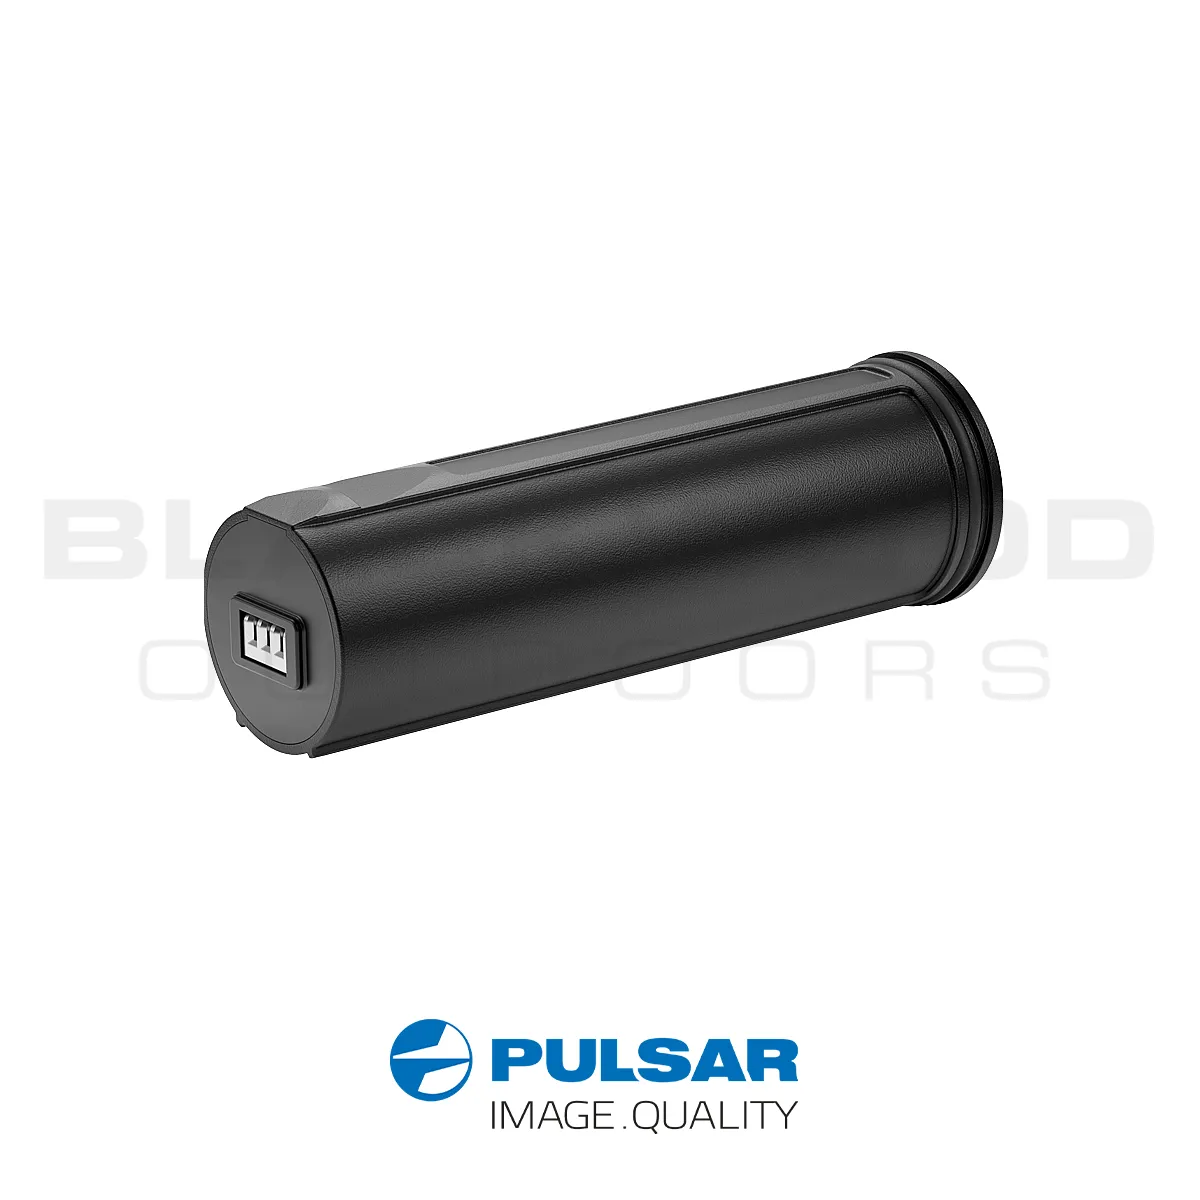 Pulsar APS3 battery suitable for Axion XM30, Thermion and Digex Thermal Models